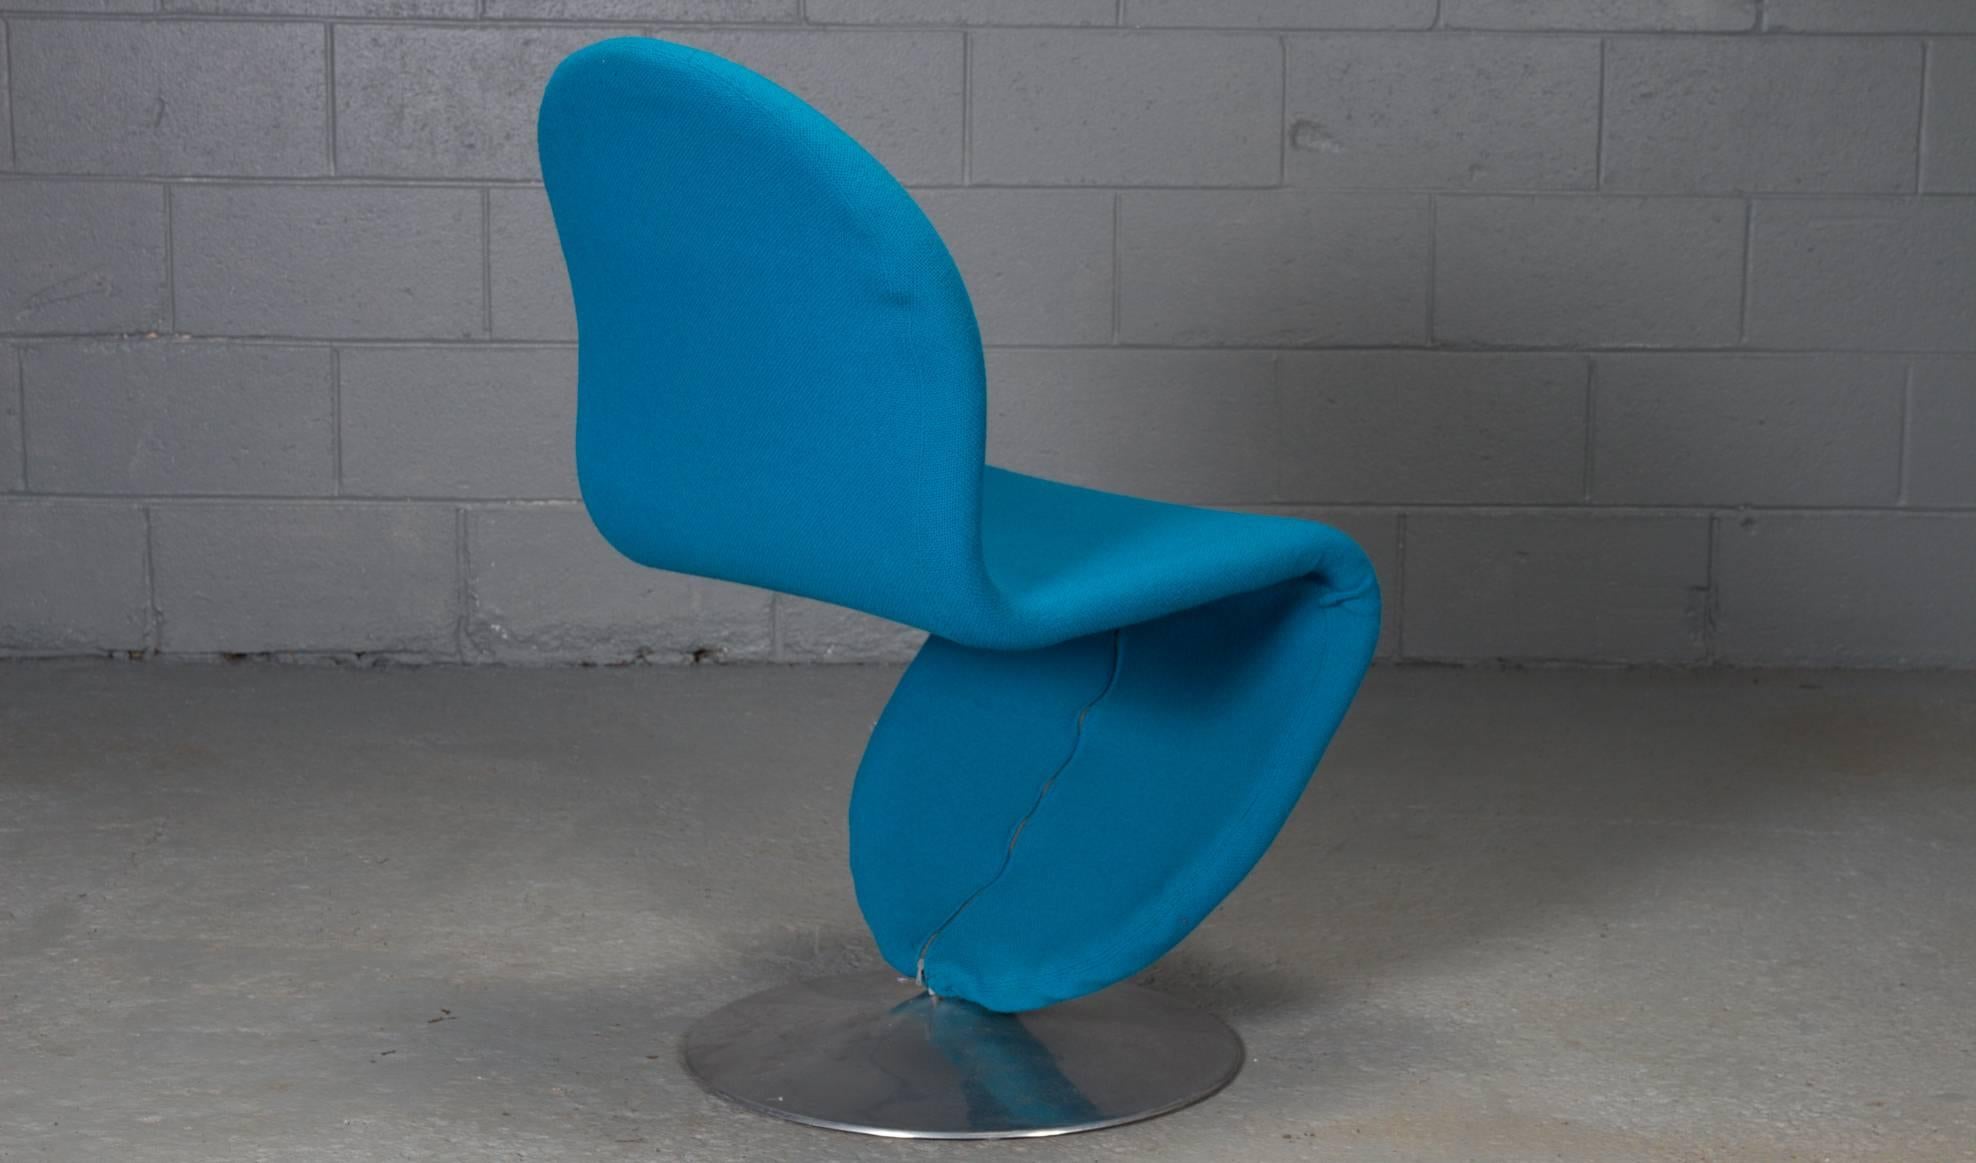 Steel Set of Six Danish Modern 1-2-3 Chairs by Verner Panton for Fritz Hansen, 1950s For Sale